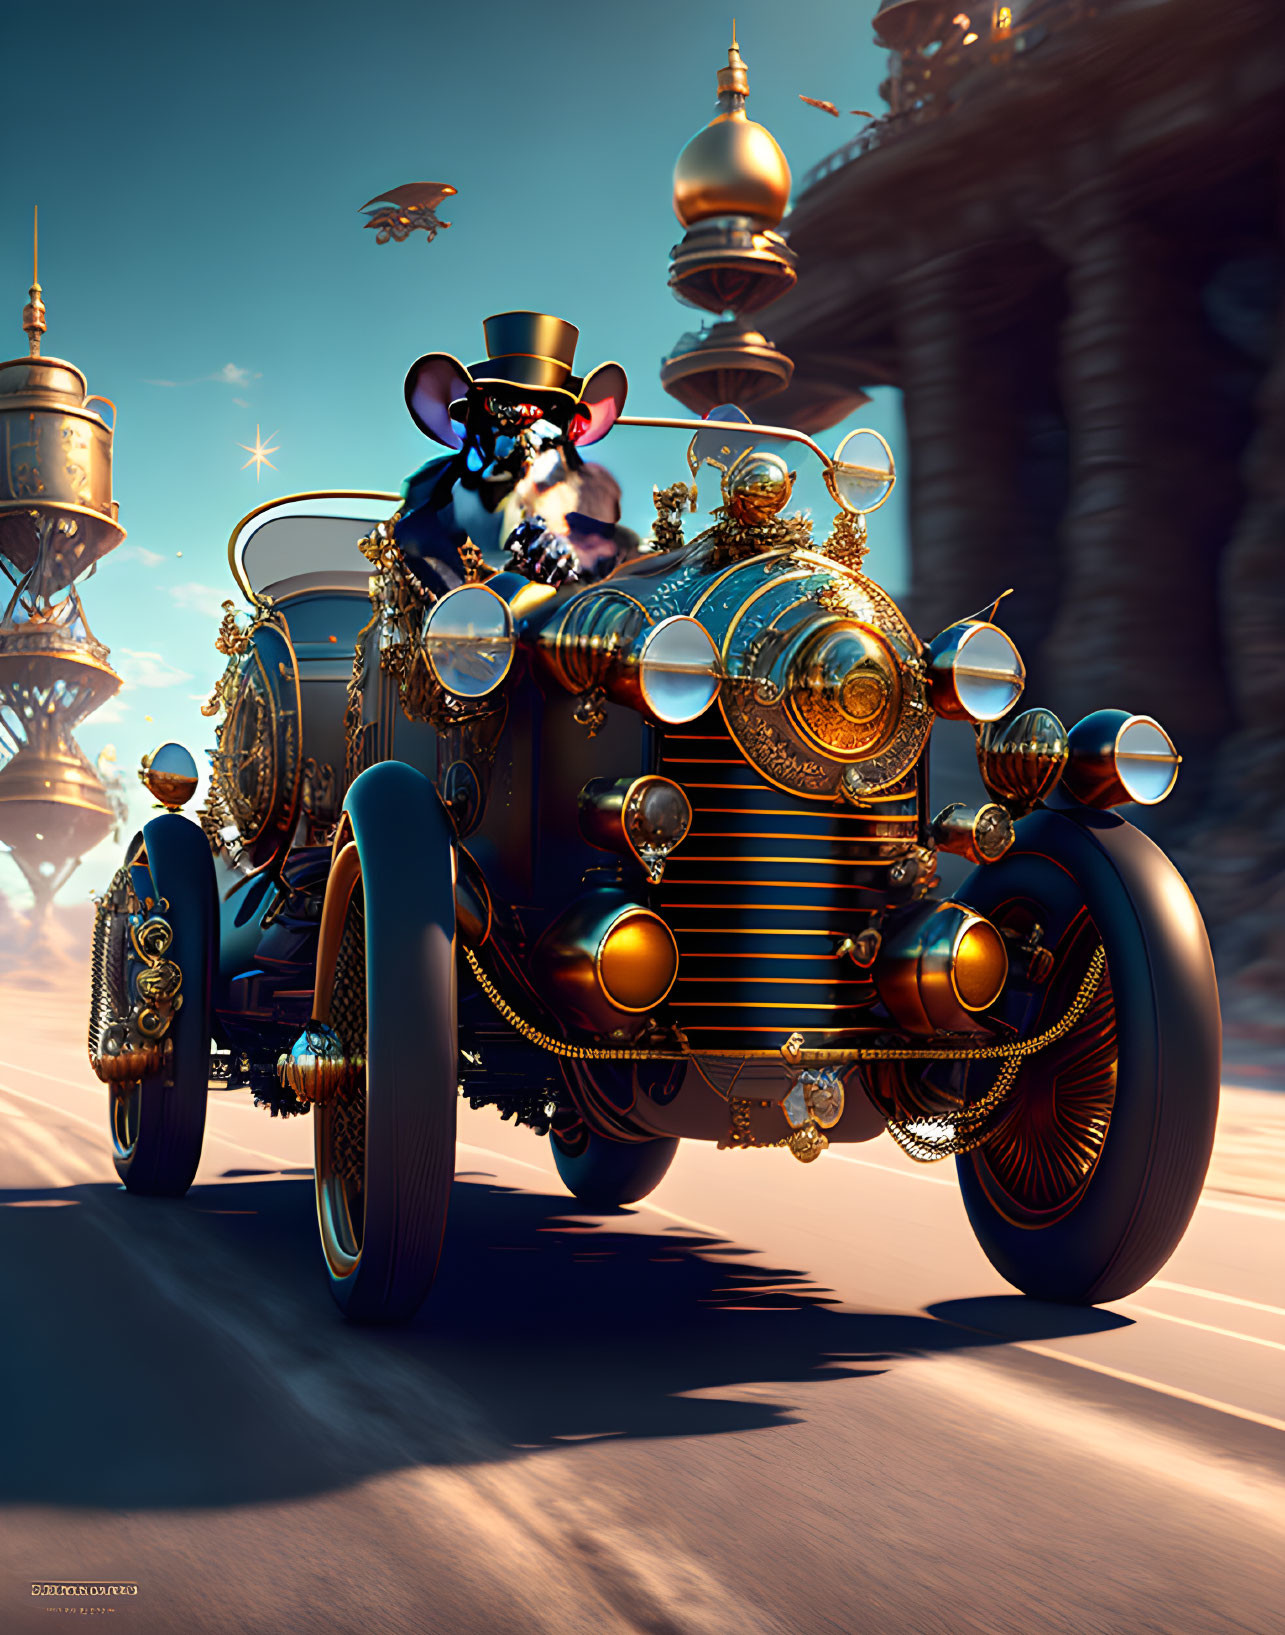 Anthropomorphic mouse in top hat driving steampunk-style car past ornate buildings